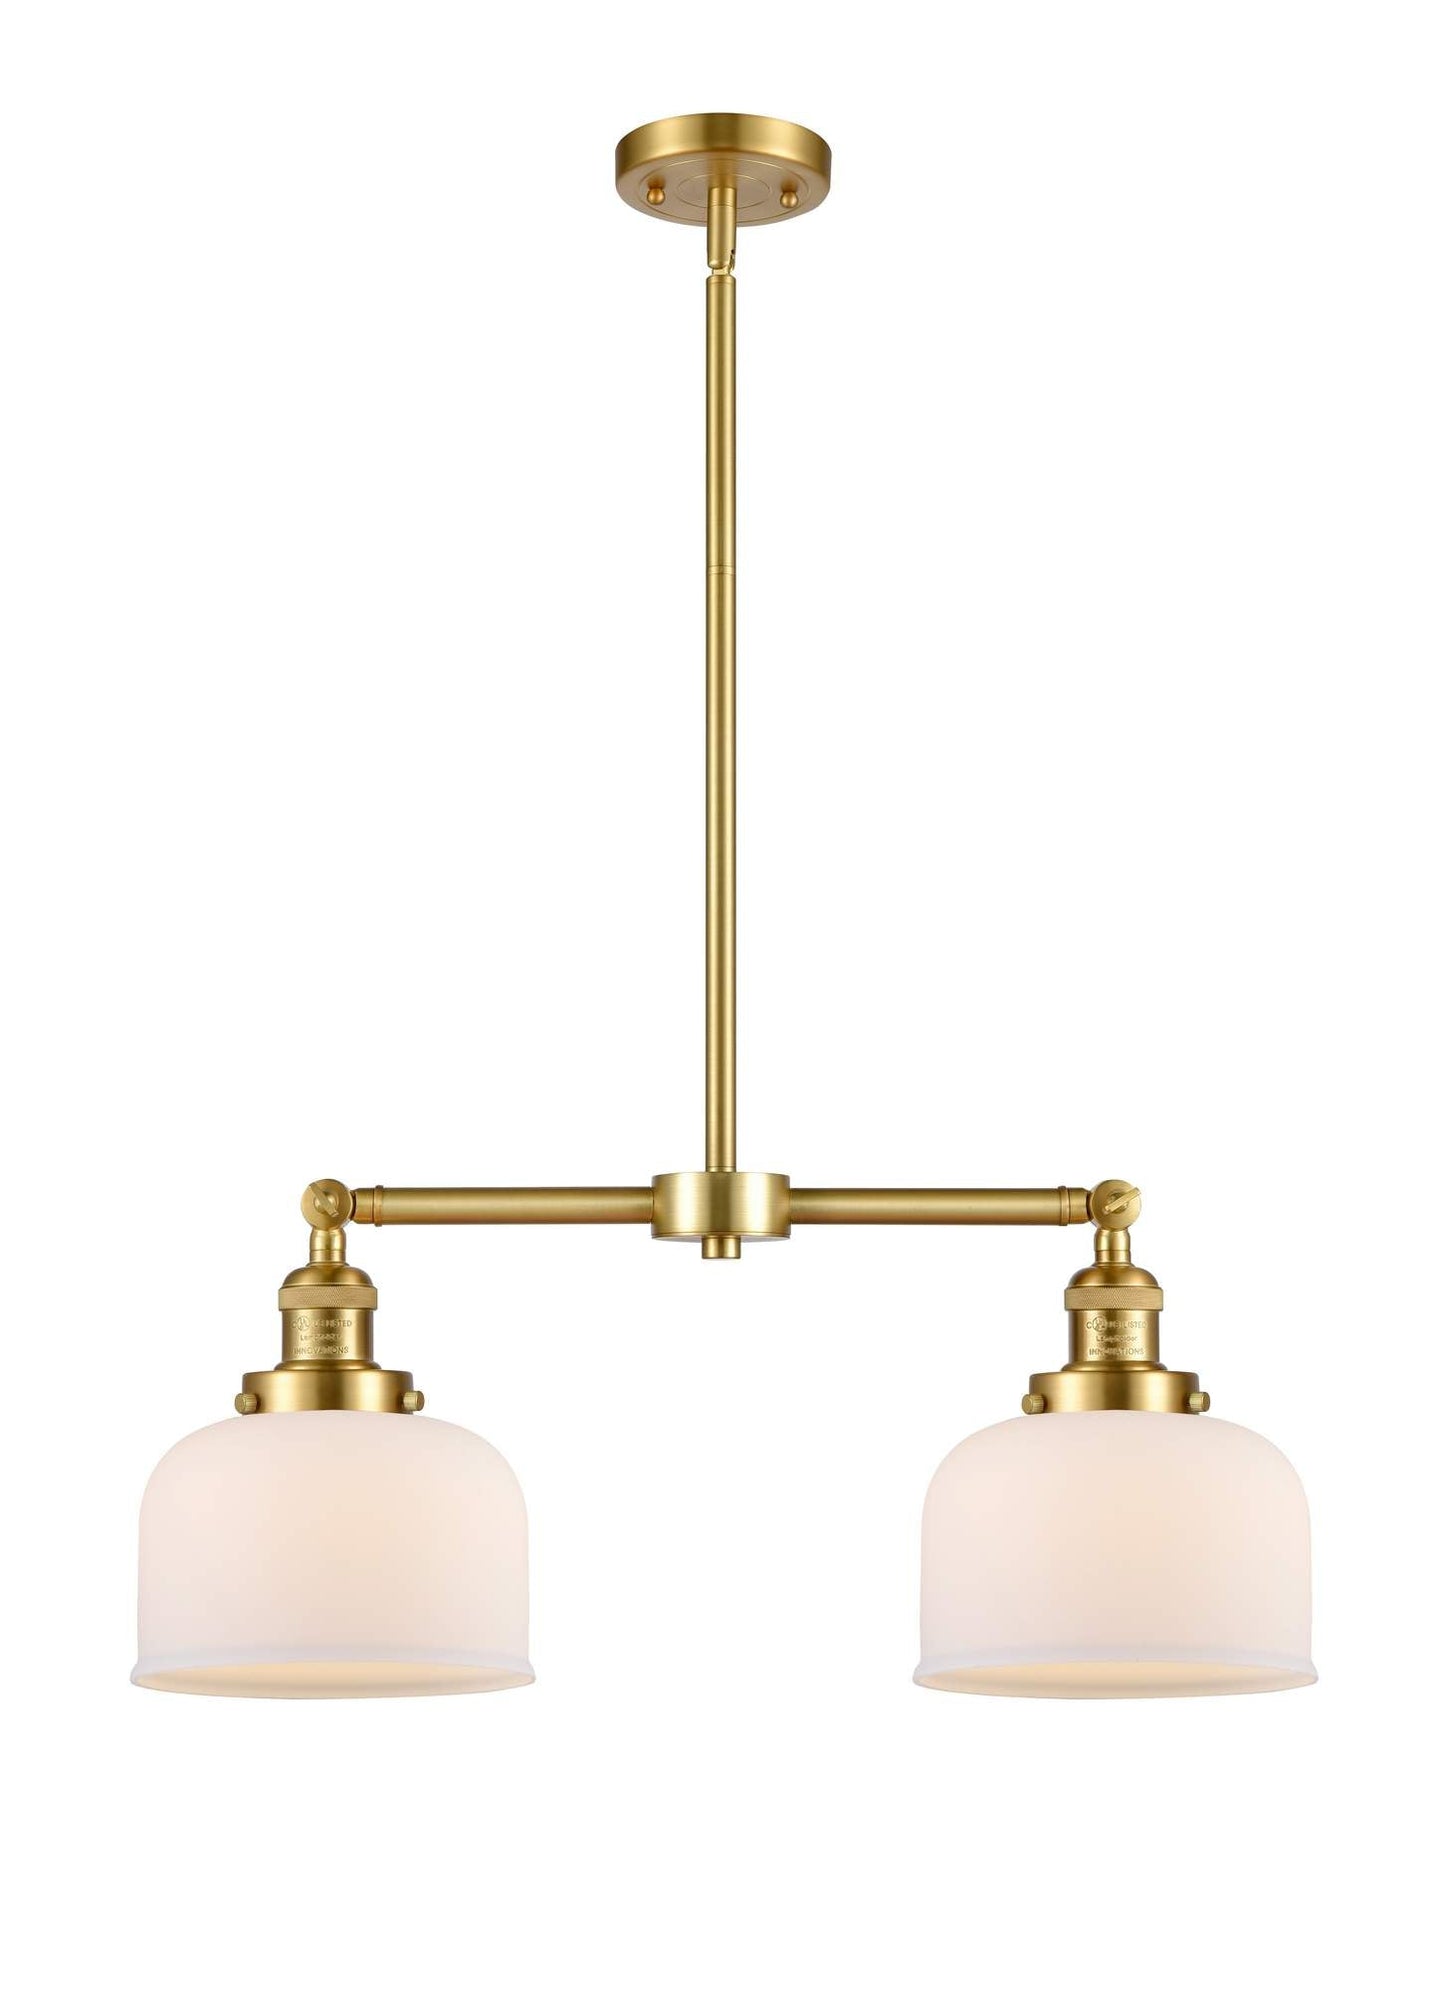 209-SG-G71 2-Light 21" Satin Gold Island Light - Matte White Cased Large Bell Glass - LED Bulb - Dimmensions: 21 x 5 x 10<br>Minimum Height : 20.875<br>Maximum Height : 44.875 - Sloped Ceiling Compatible: Yes